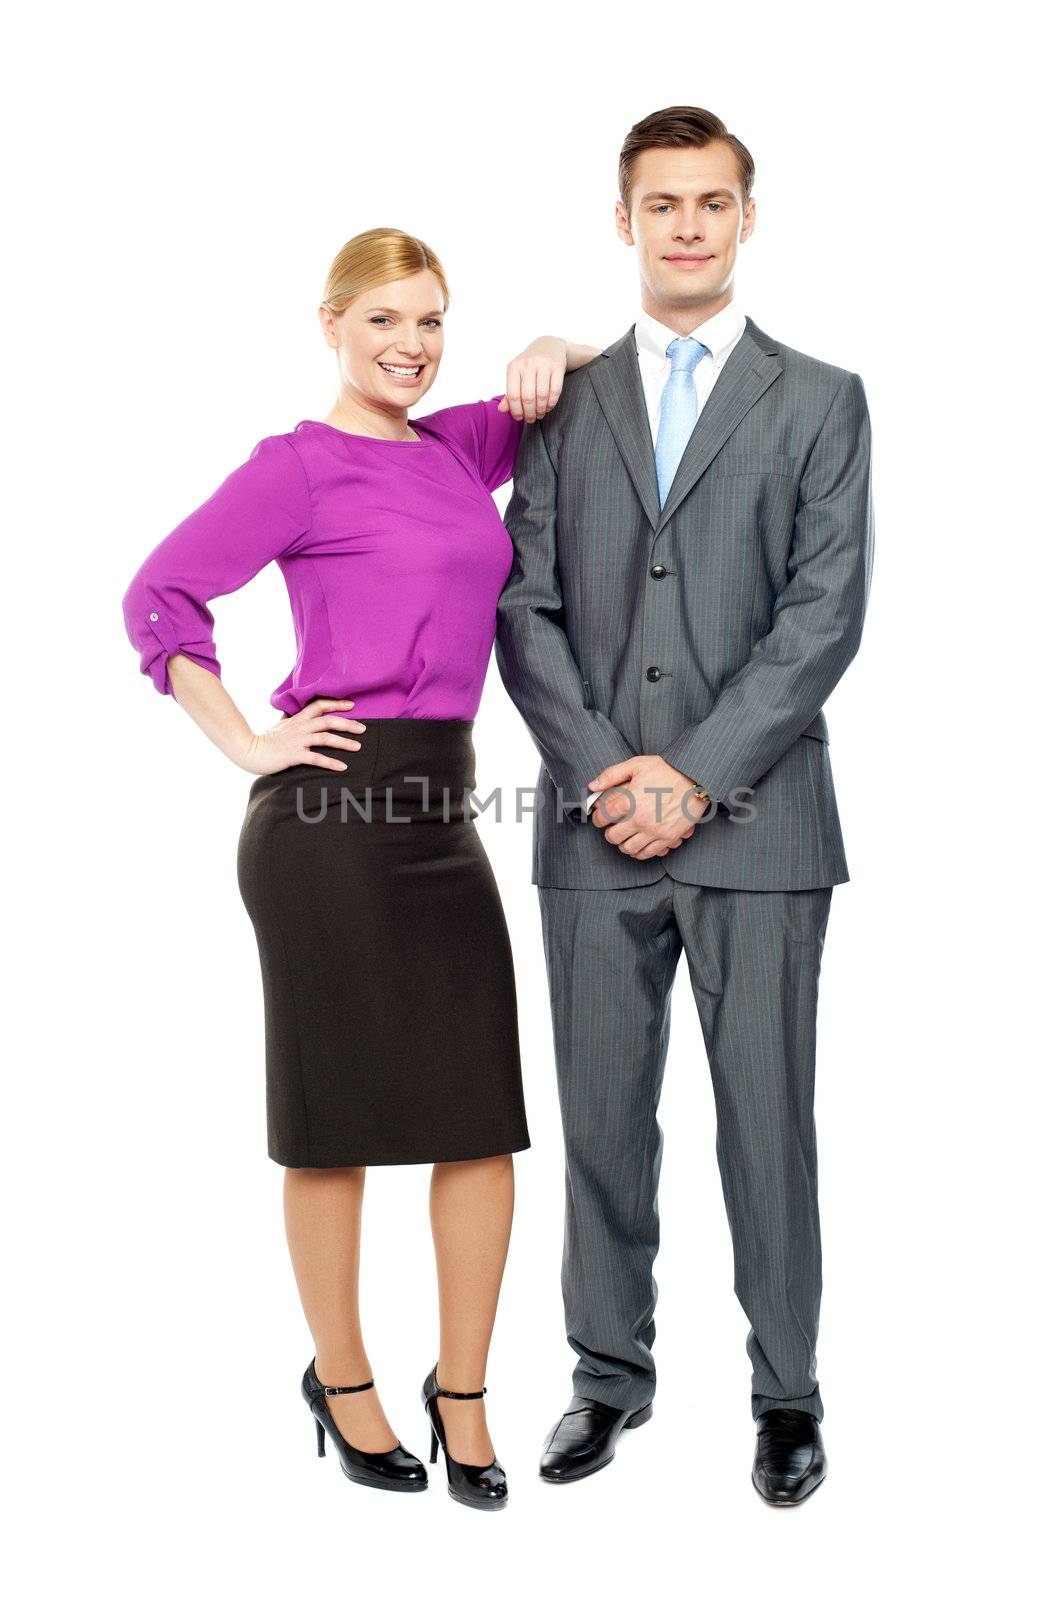 Business team members posing together by stockyimages